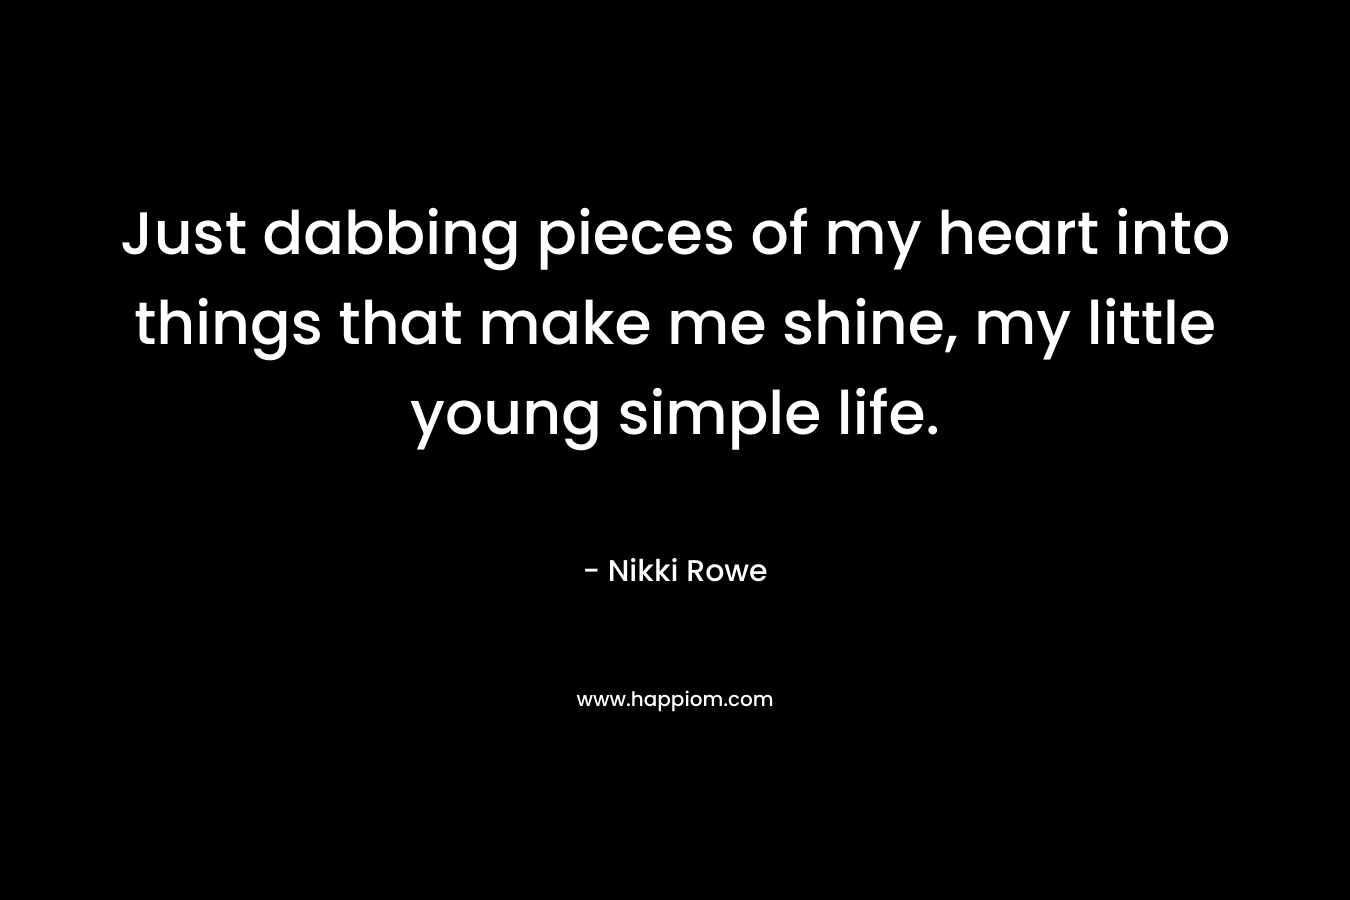 Just dabbing pieces of my heart into things that make me shine, my little young simple life. – Nikki Rowe